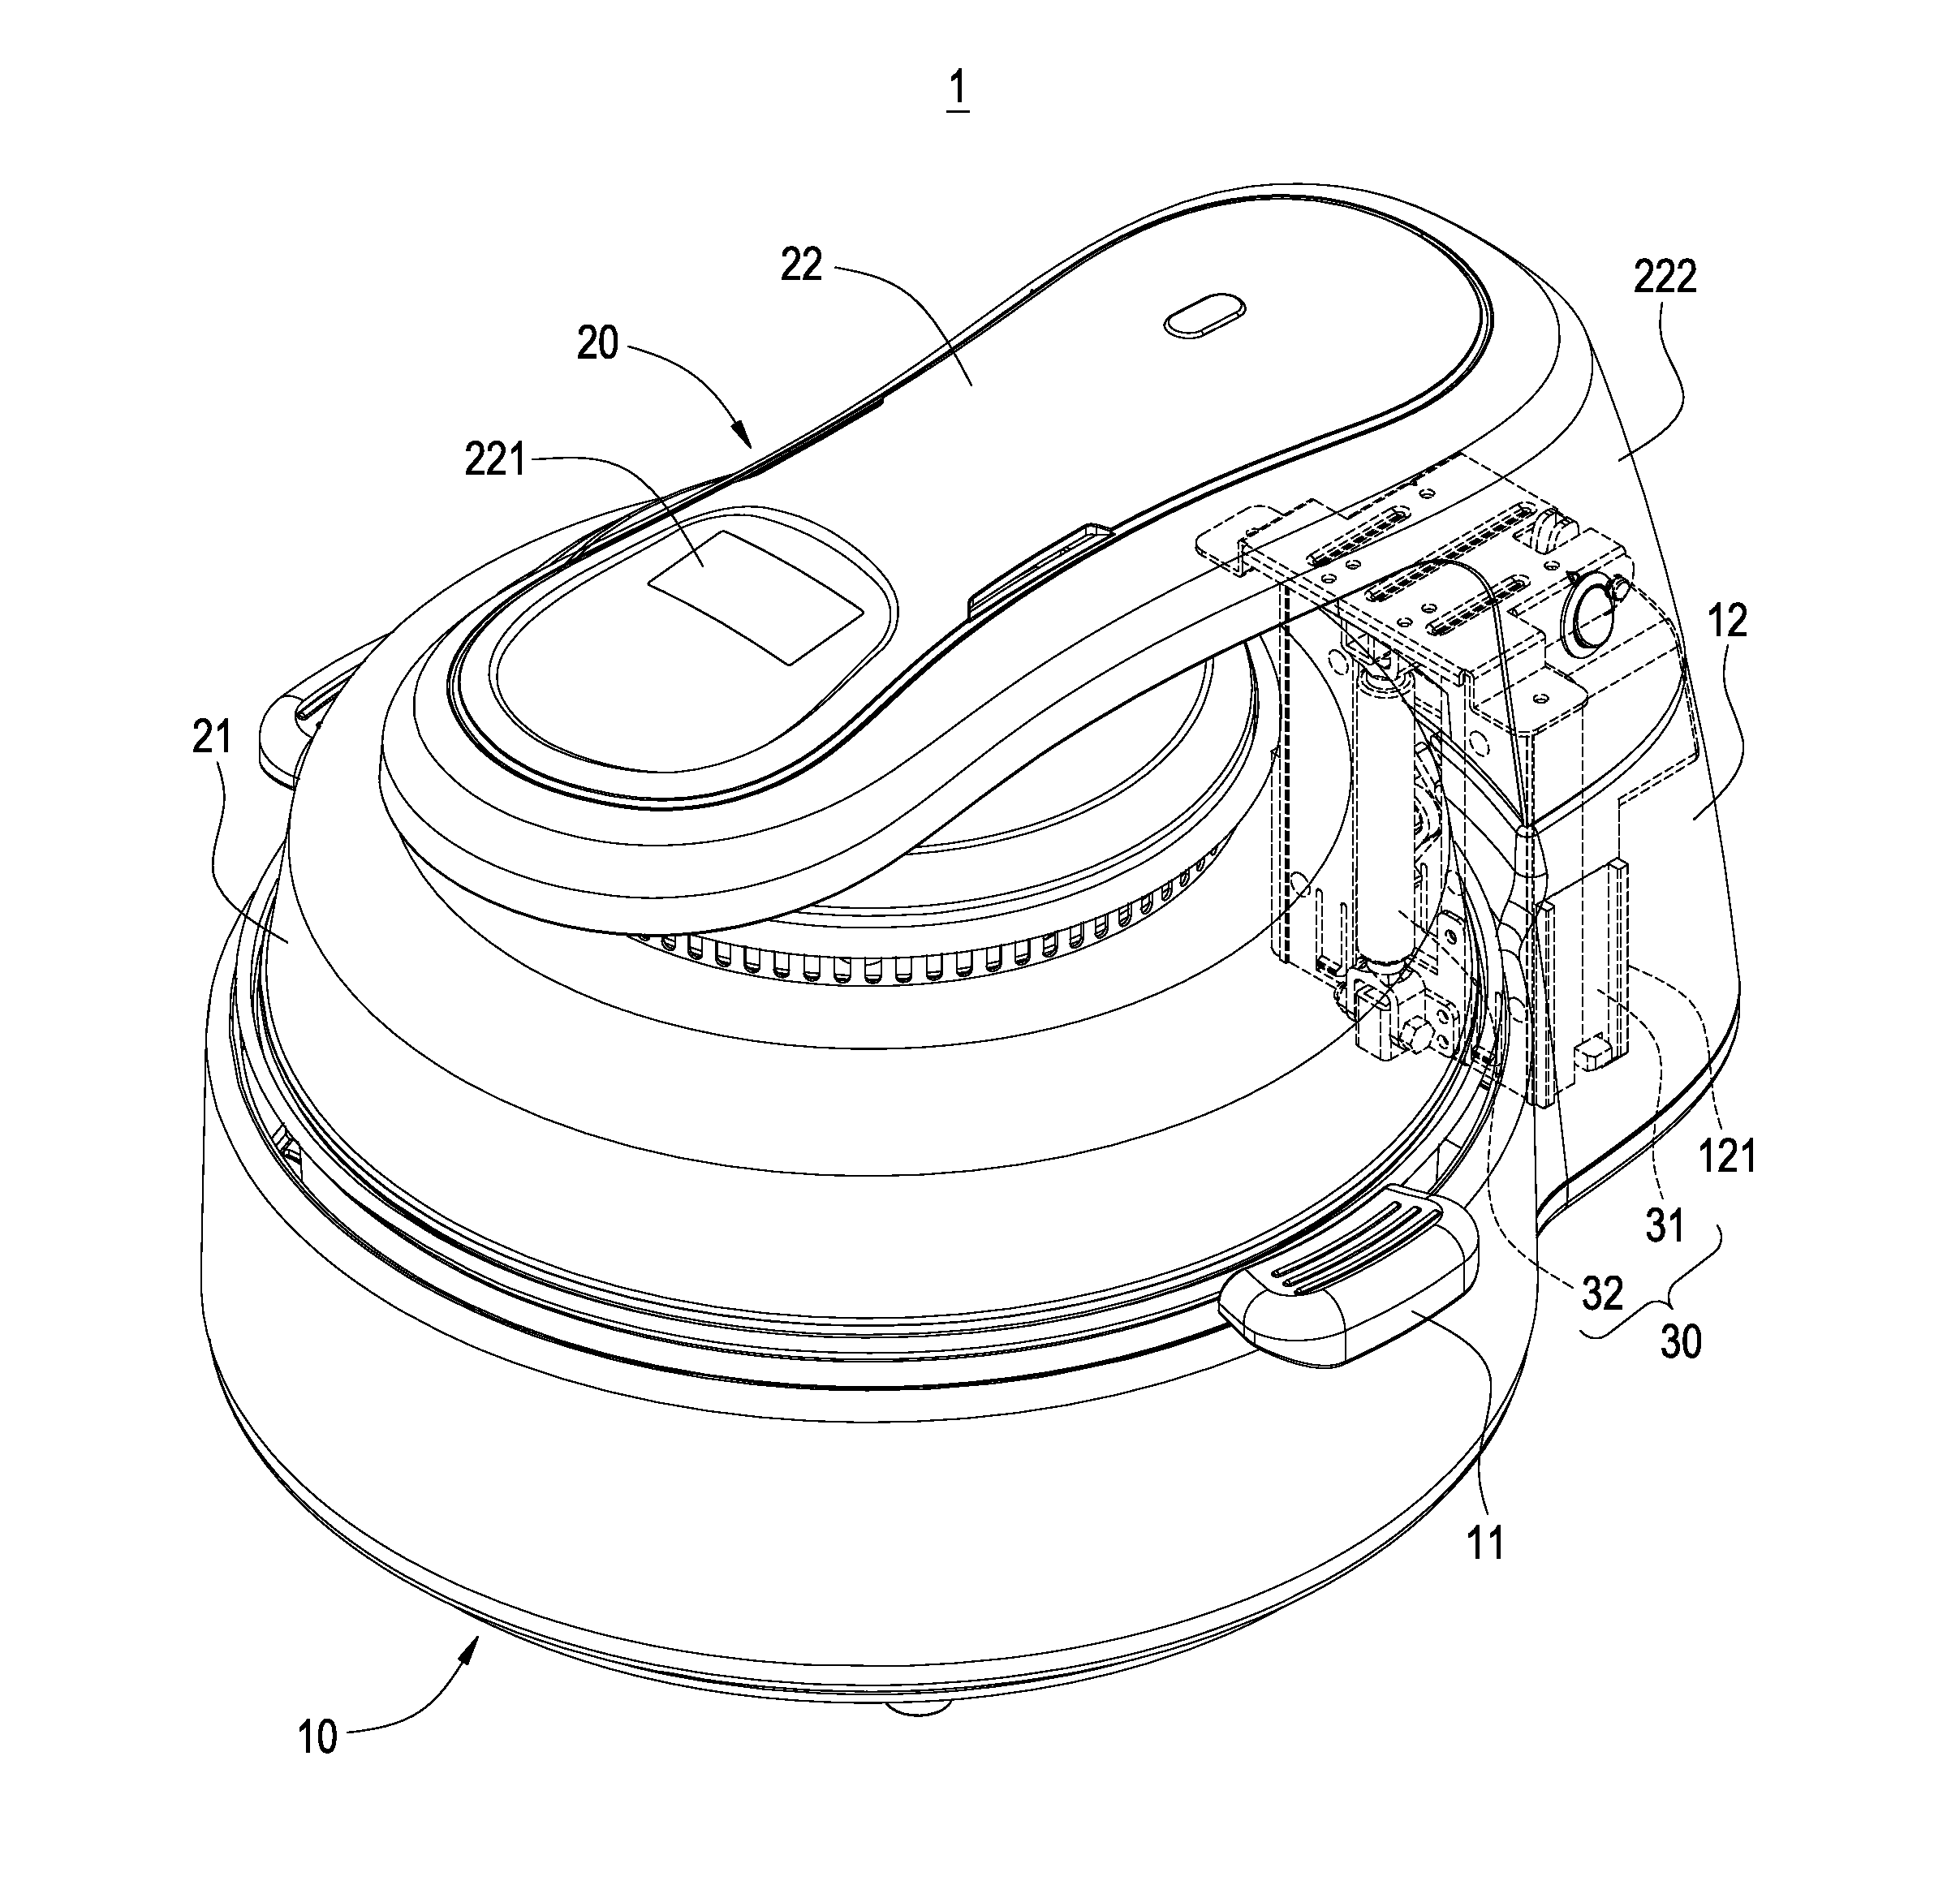 Pot with a cover-lifting mechanism